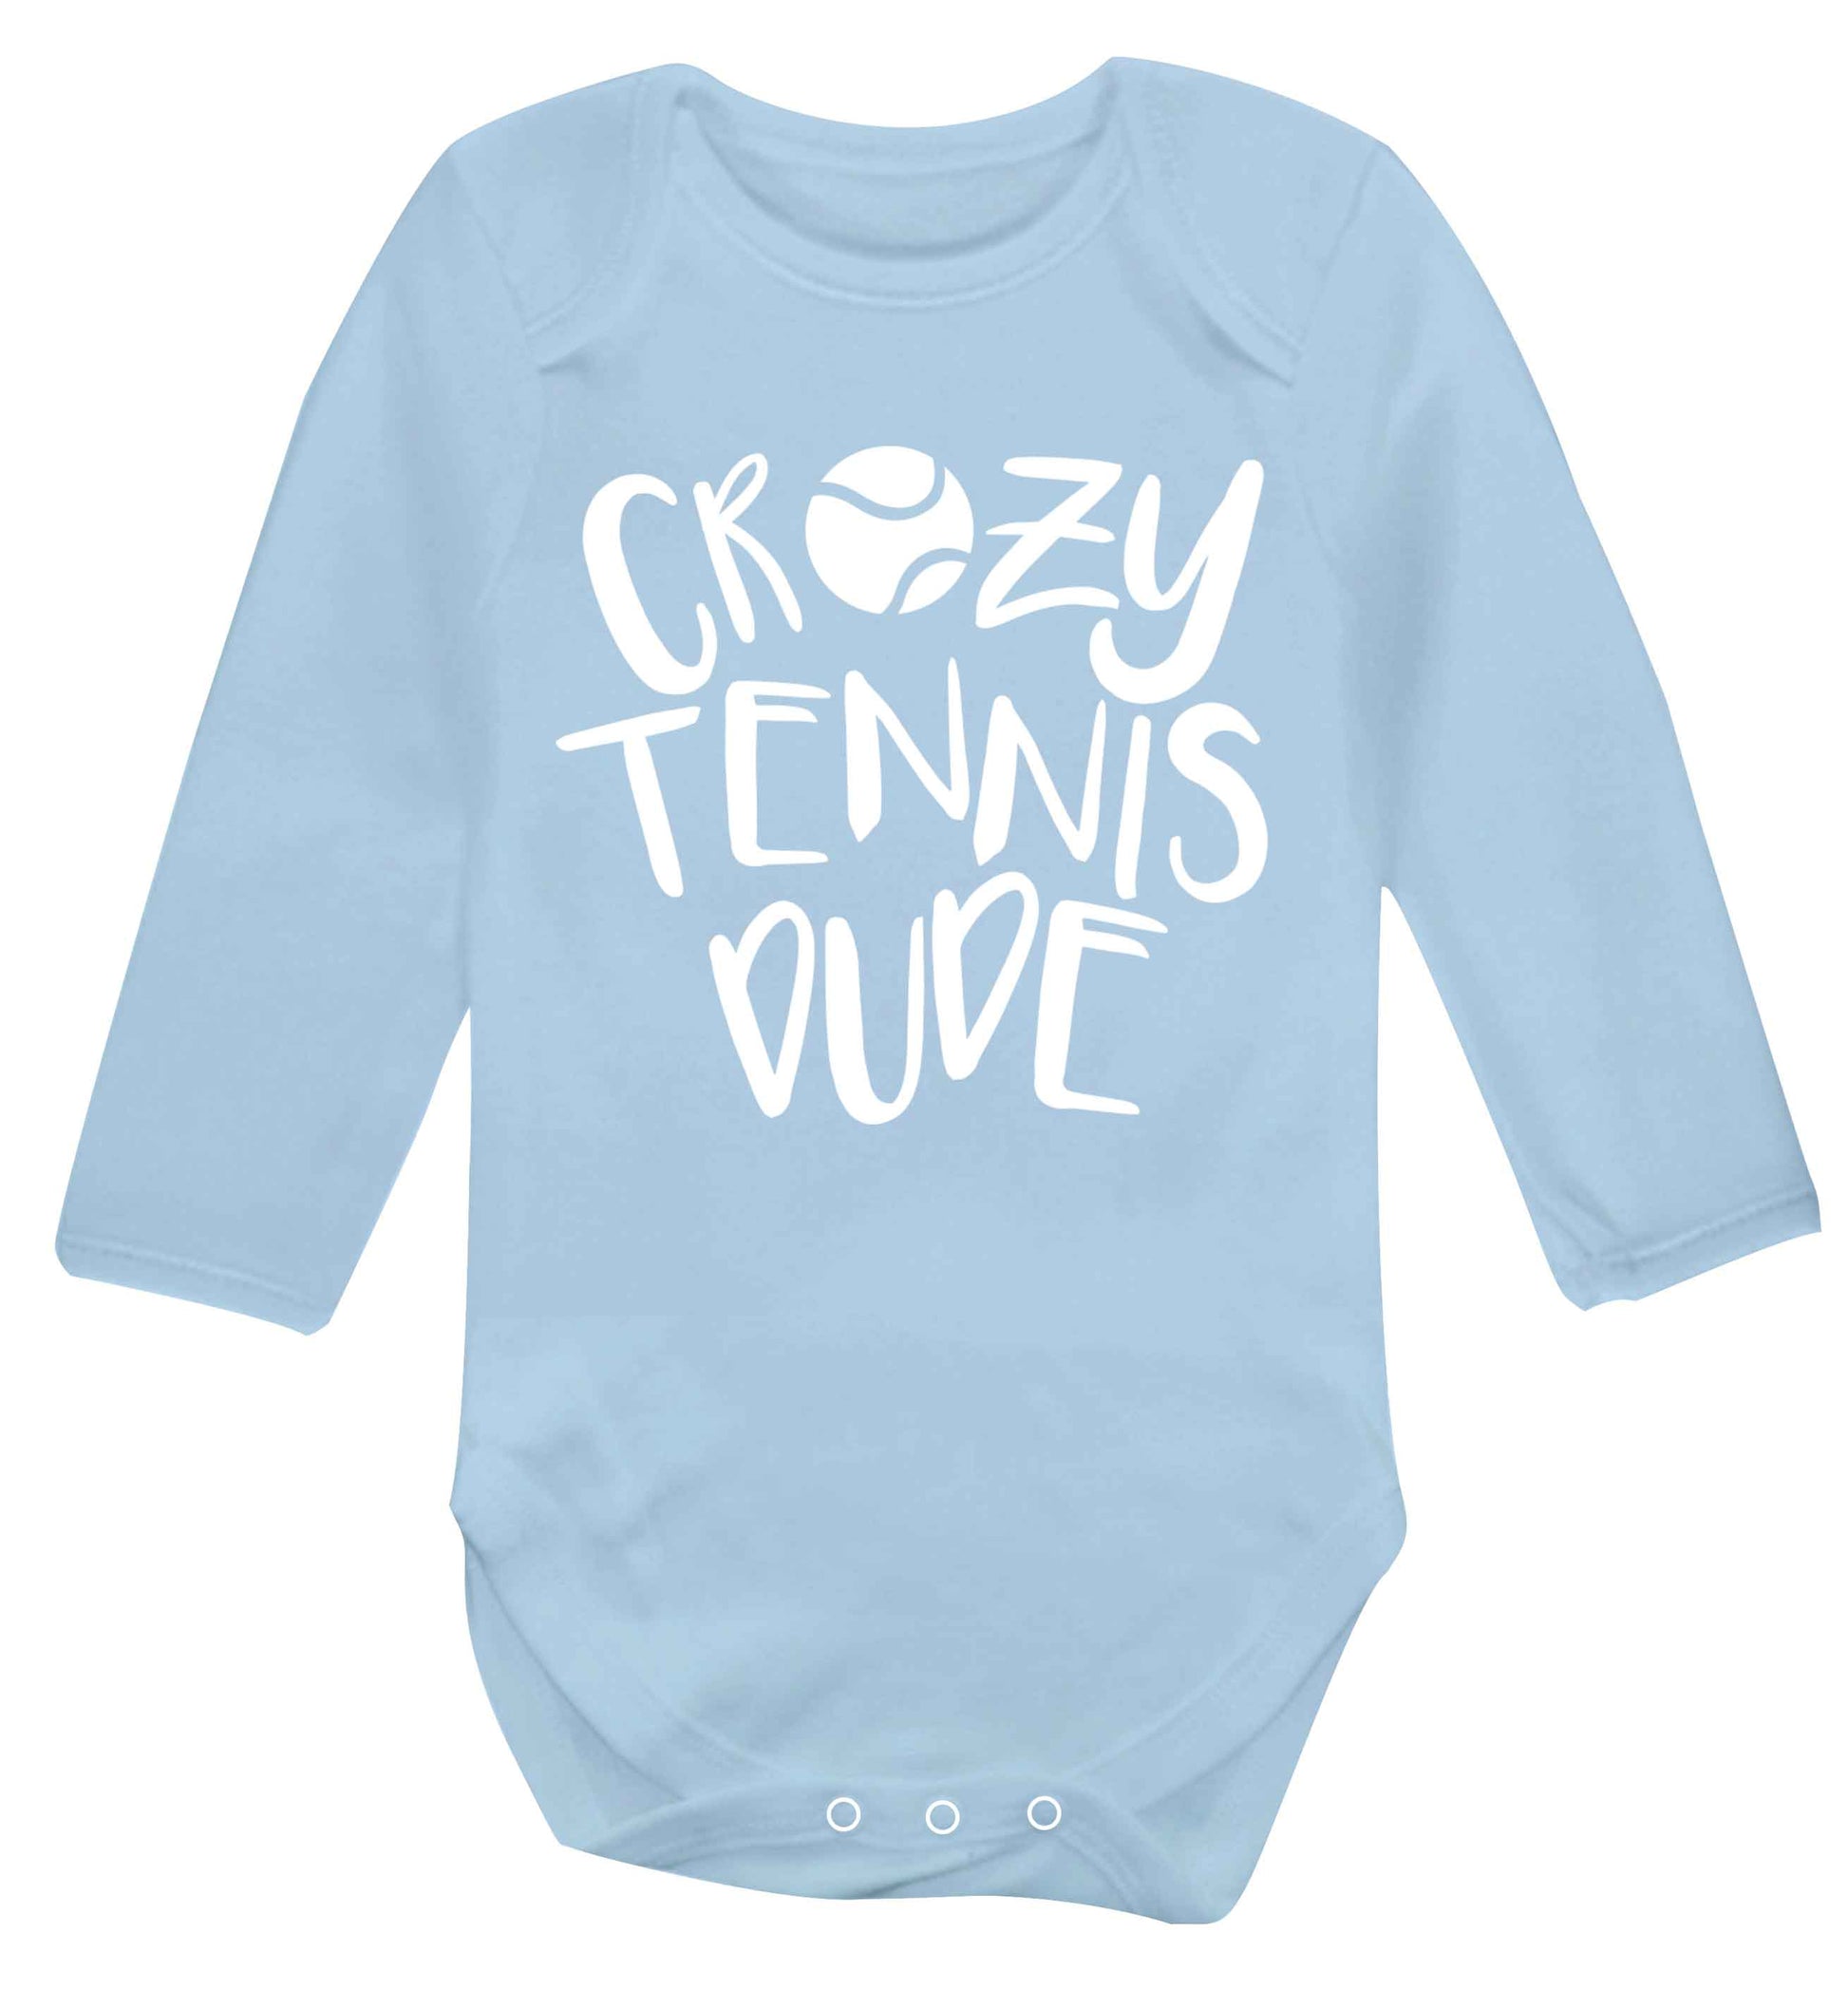 Crazy tennis dude Baby Vest long sleeved pale blue 6-12 months